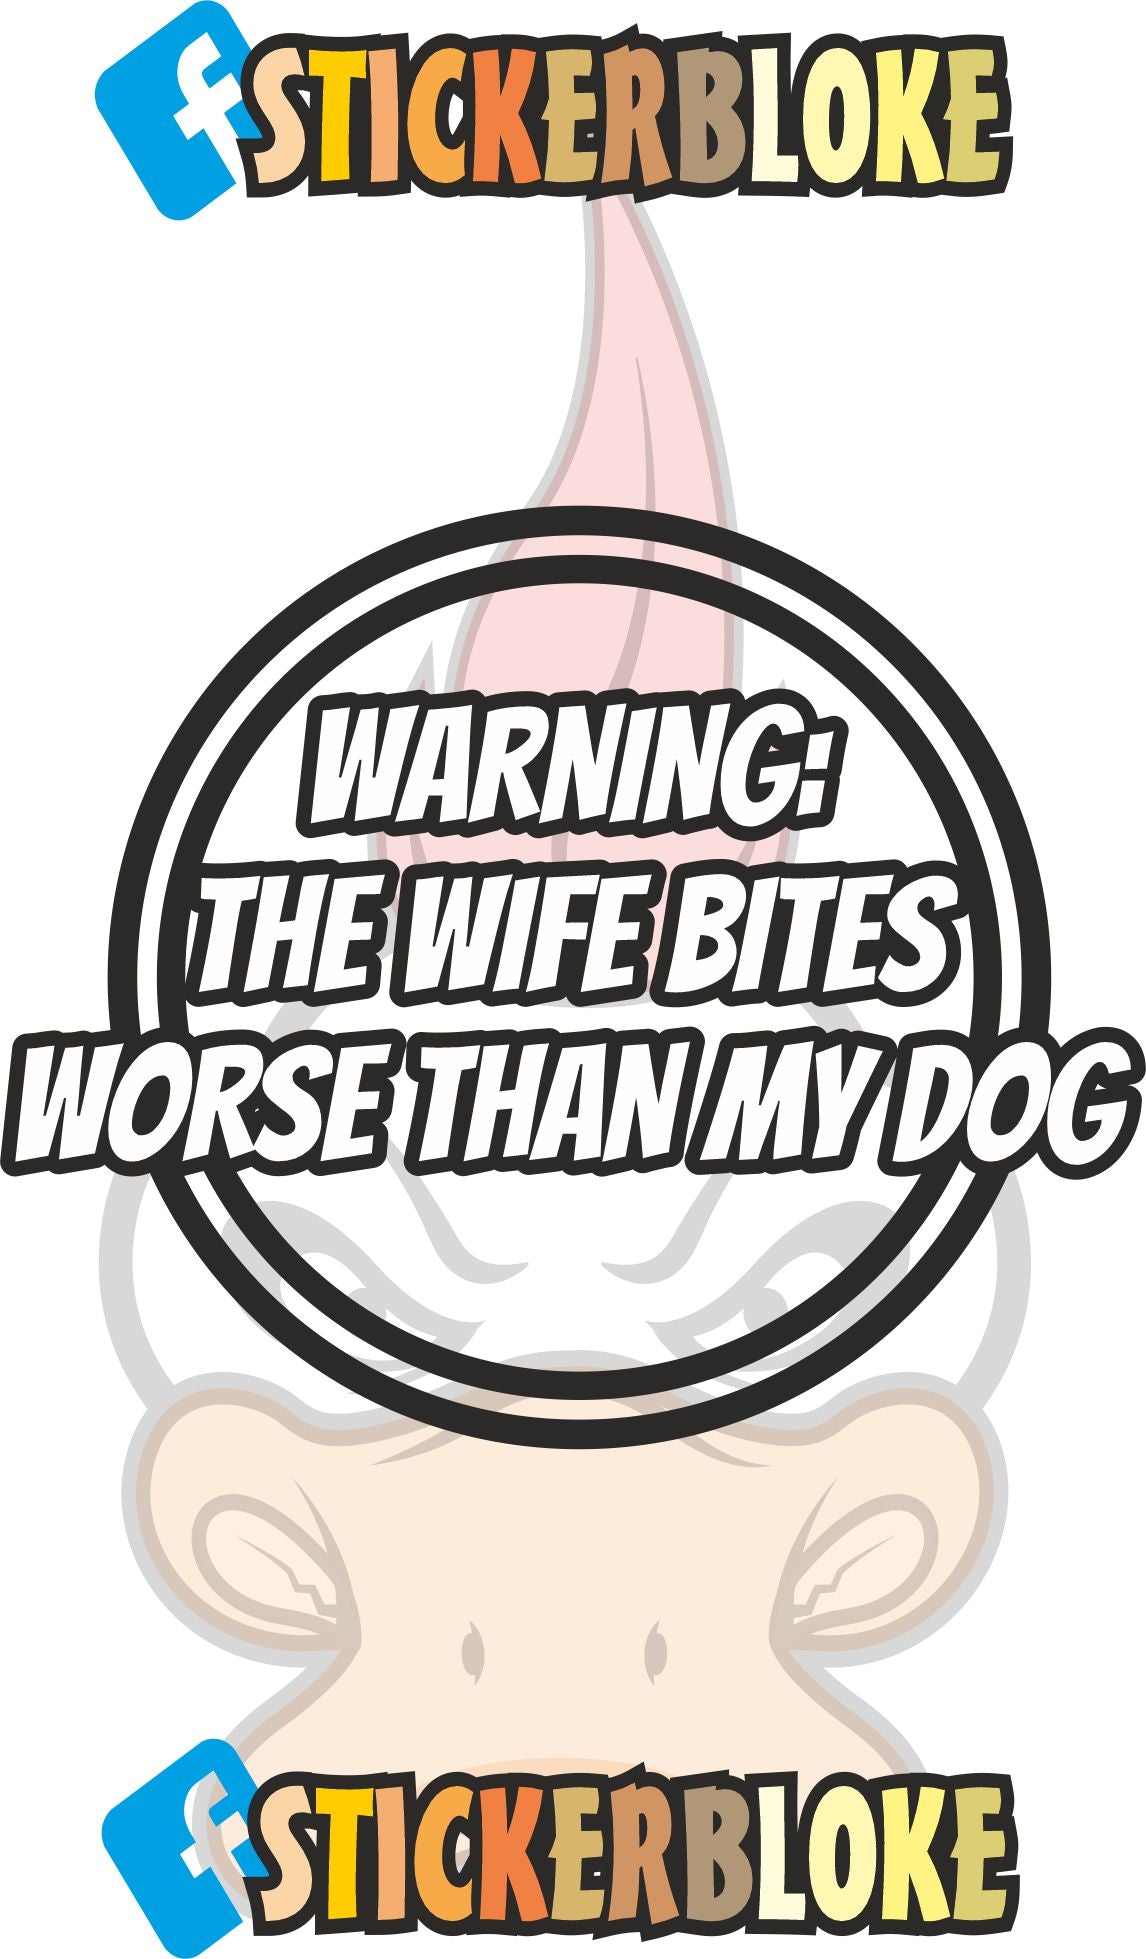 WARNING THE WIFE BITES WORSE THAN MY DOG